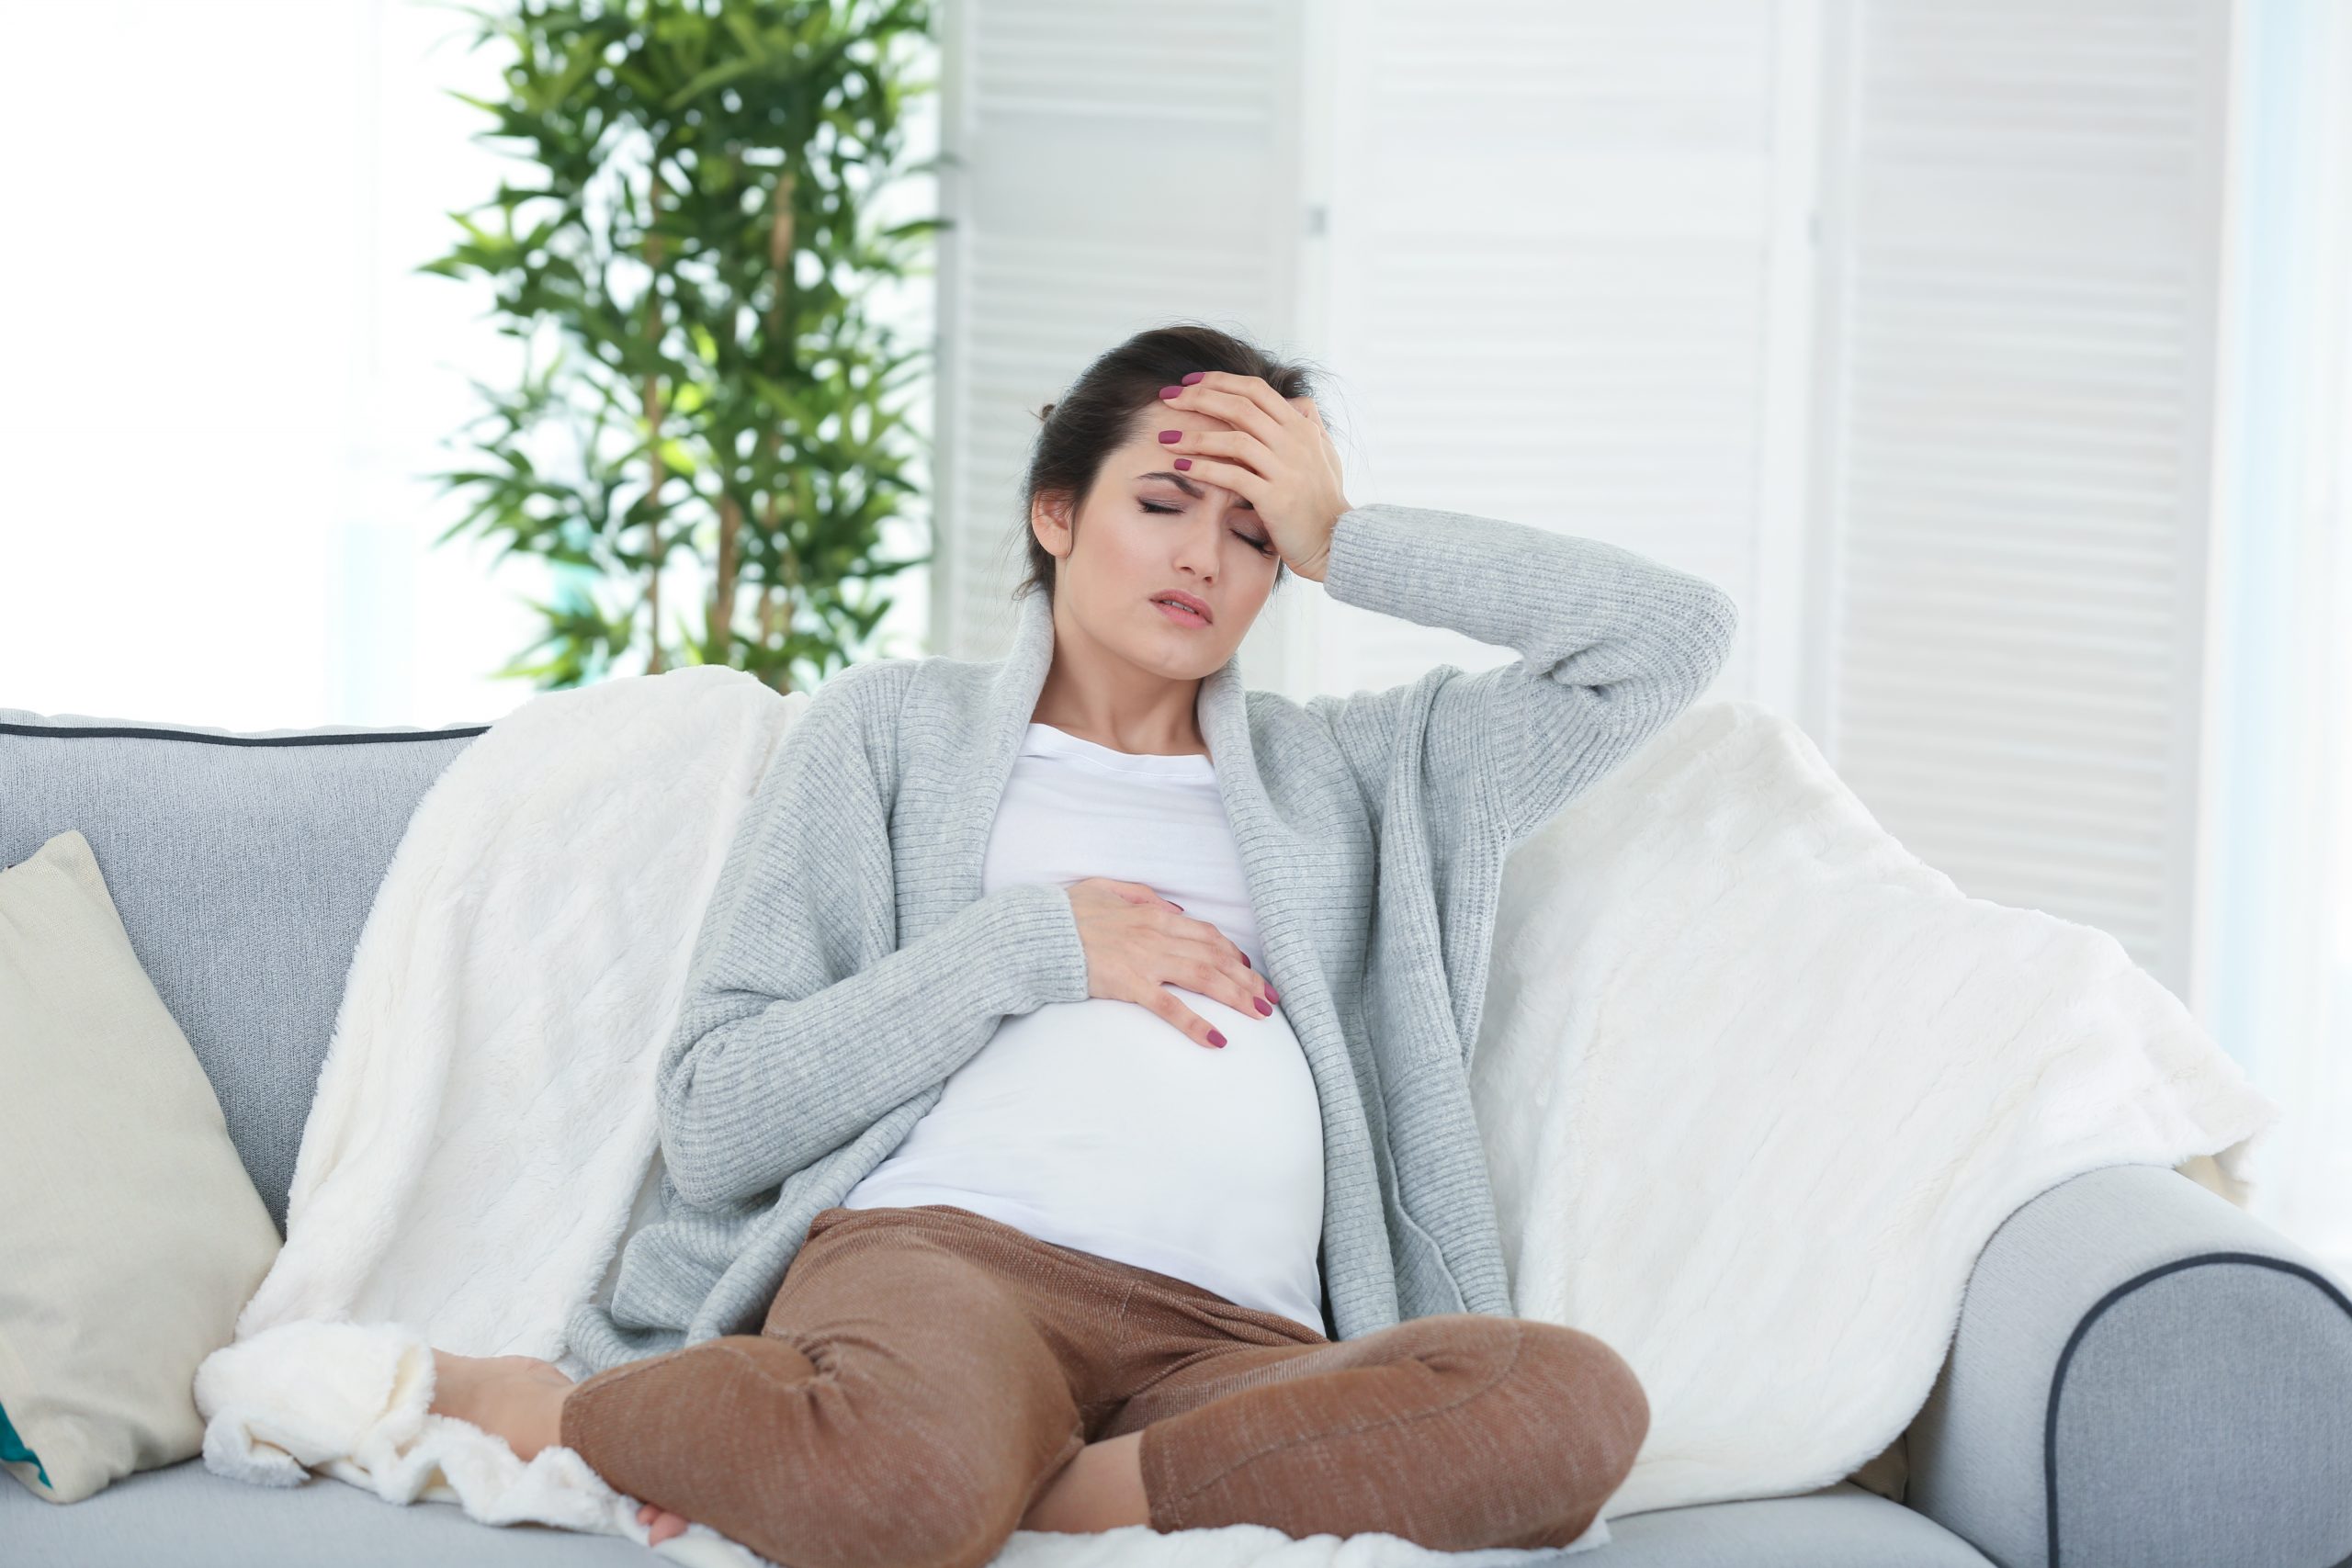 7 signs of pregnancy poisoning #1